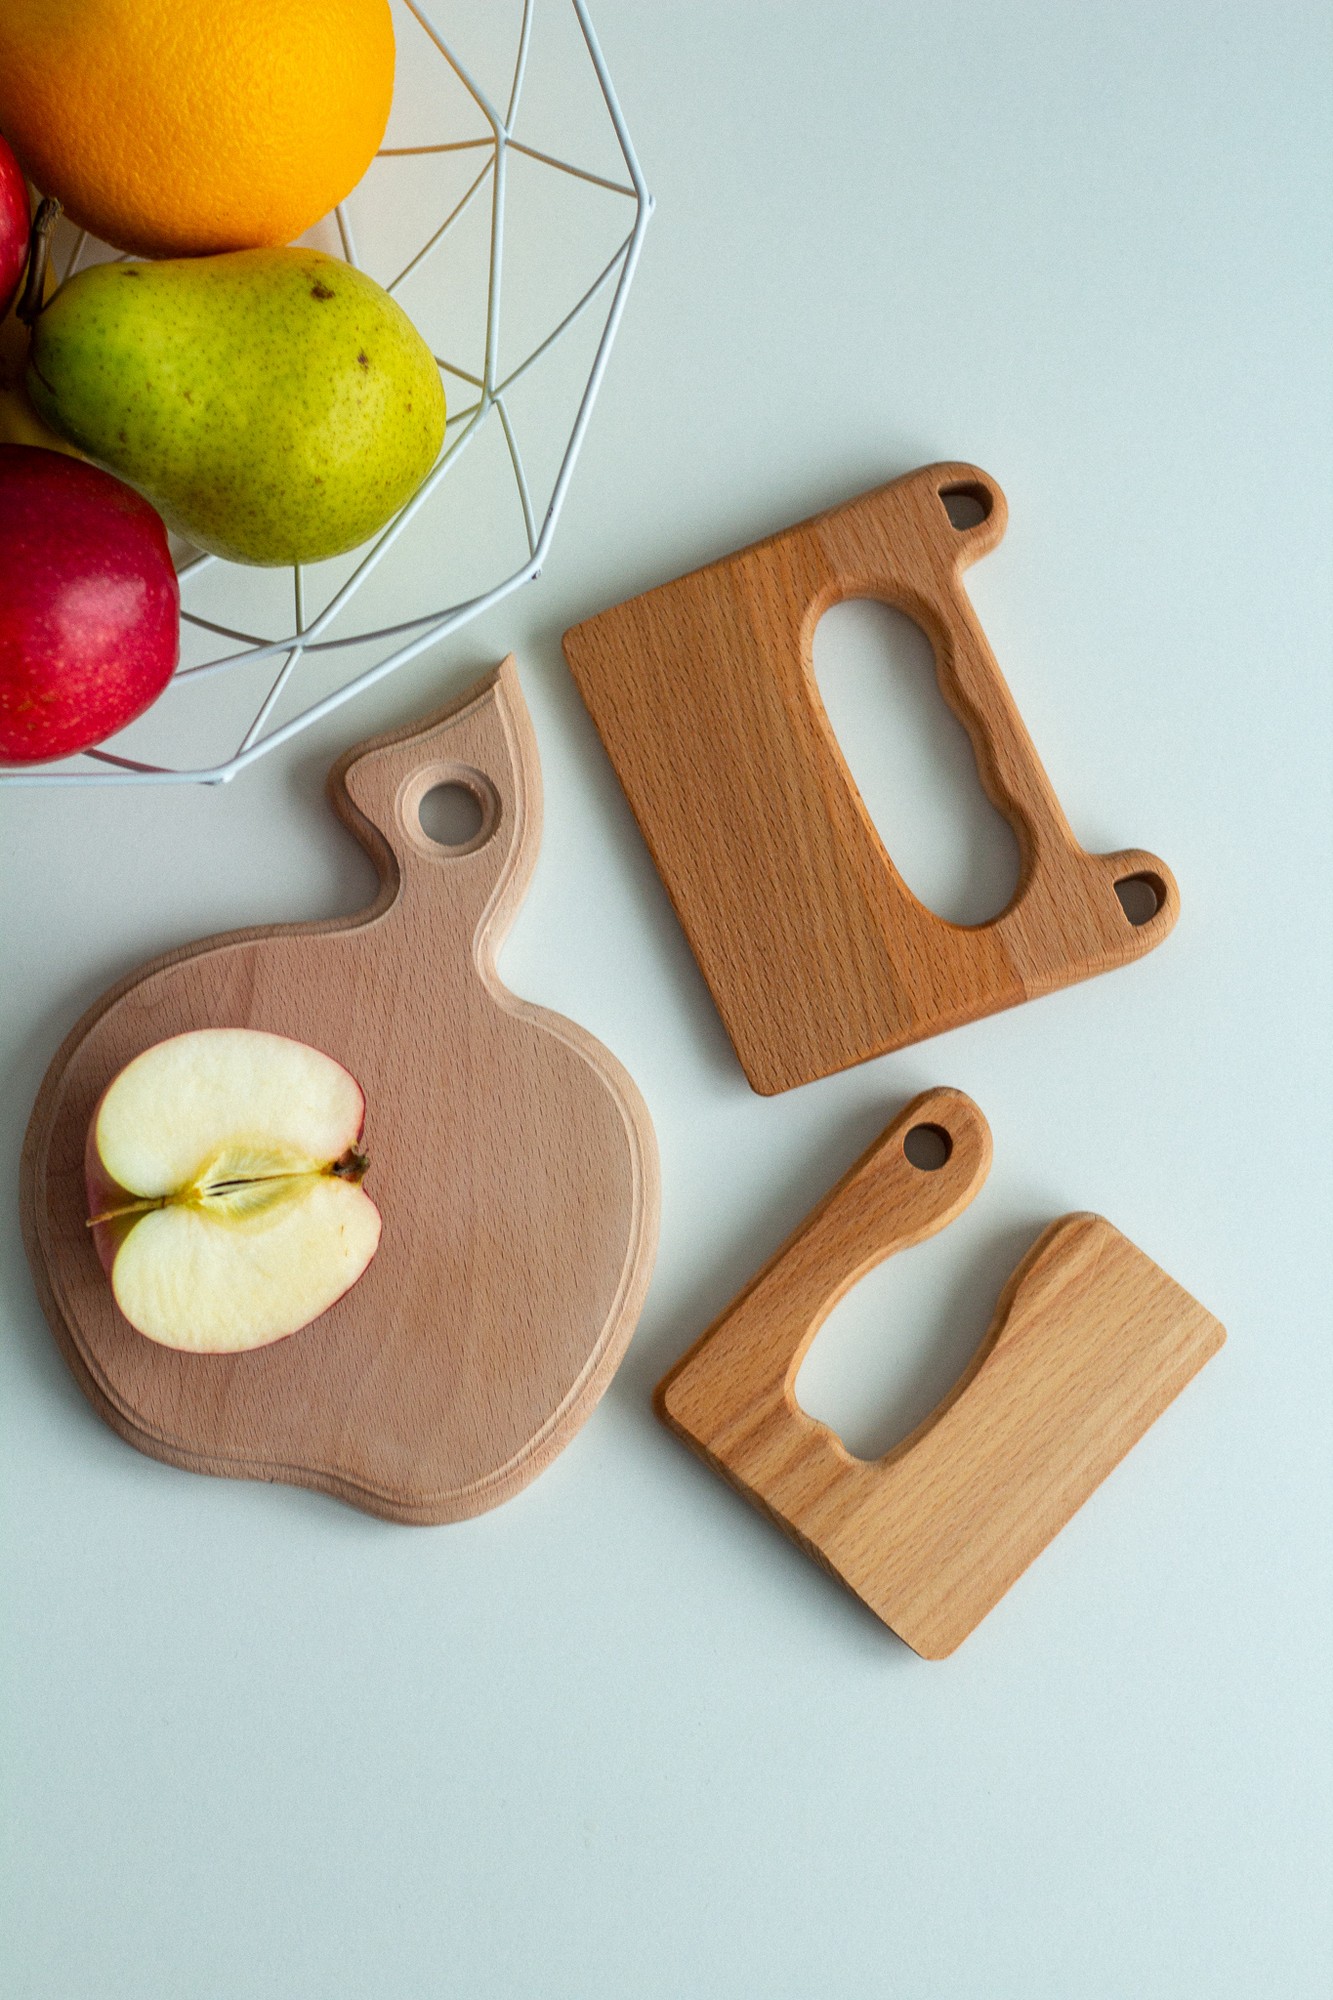 Children's toy kitchen set Wooden board and 2 knives